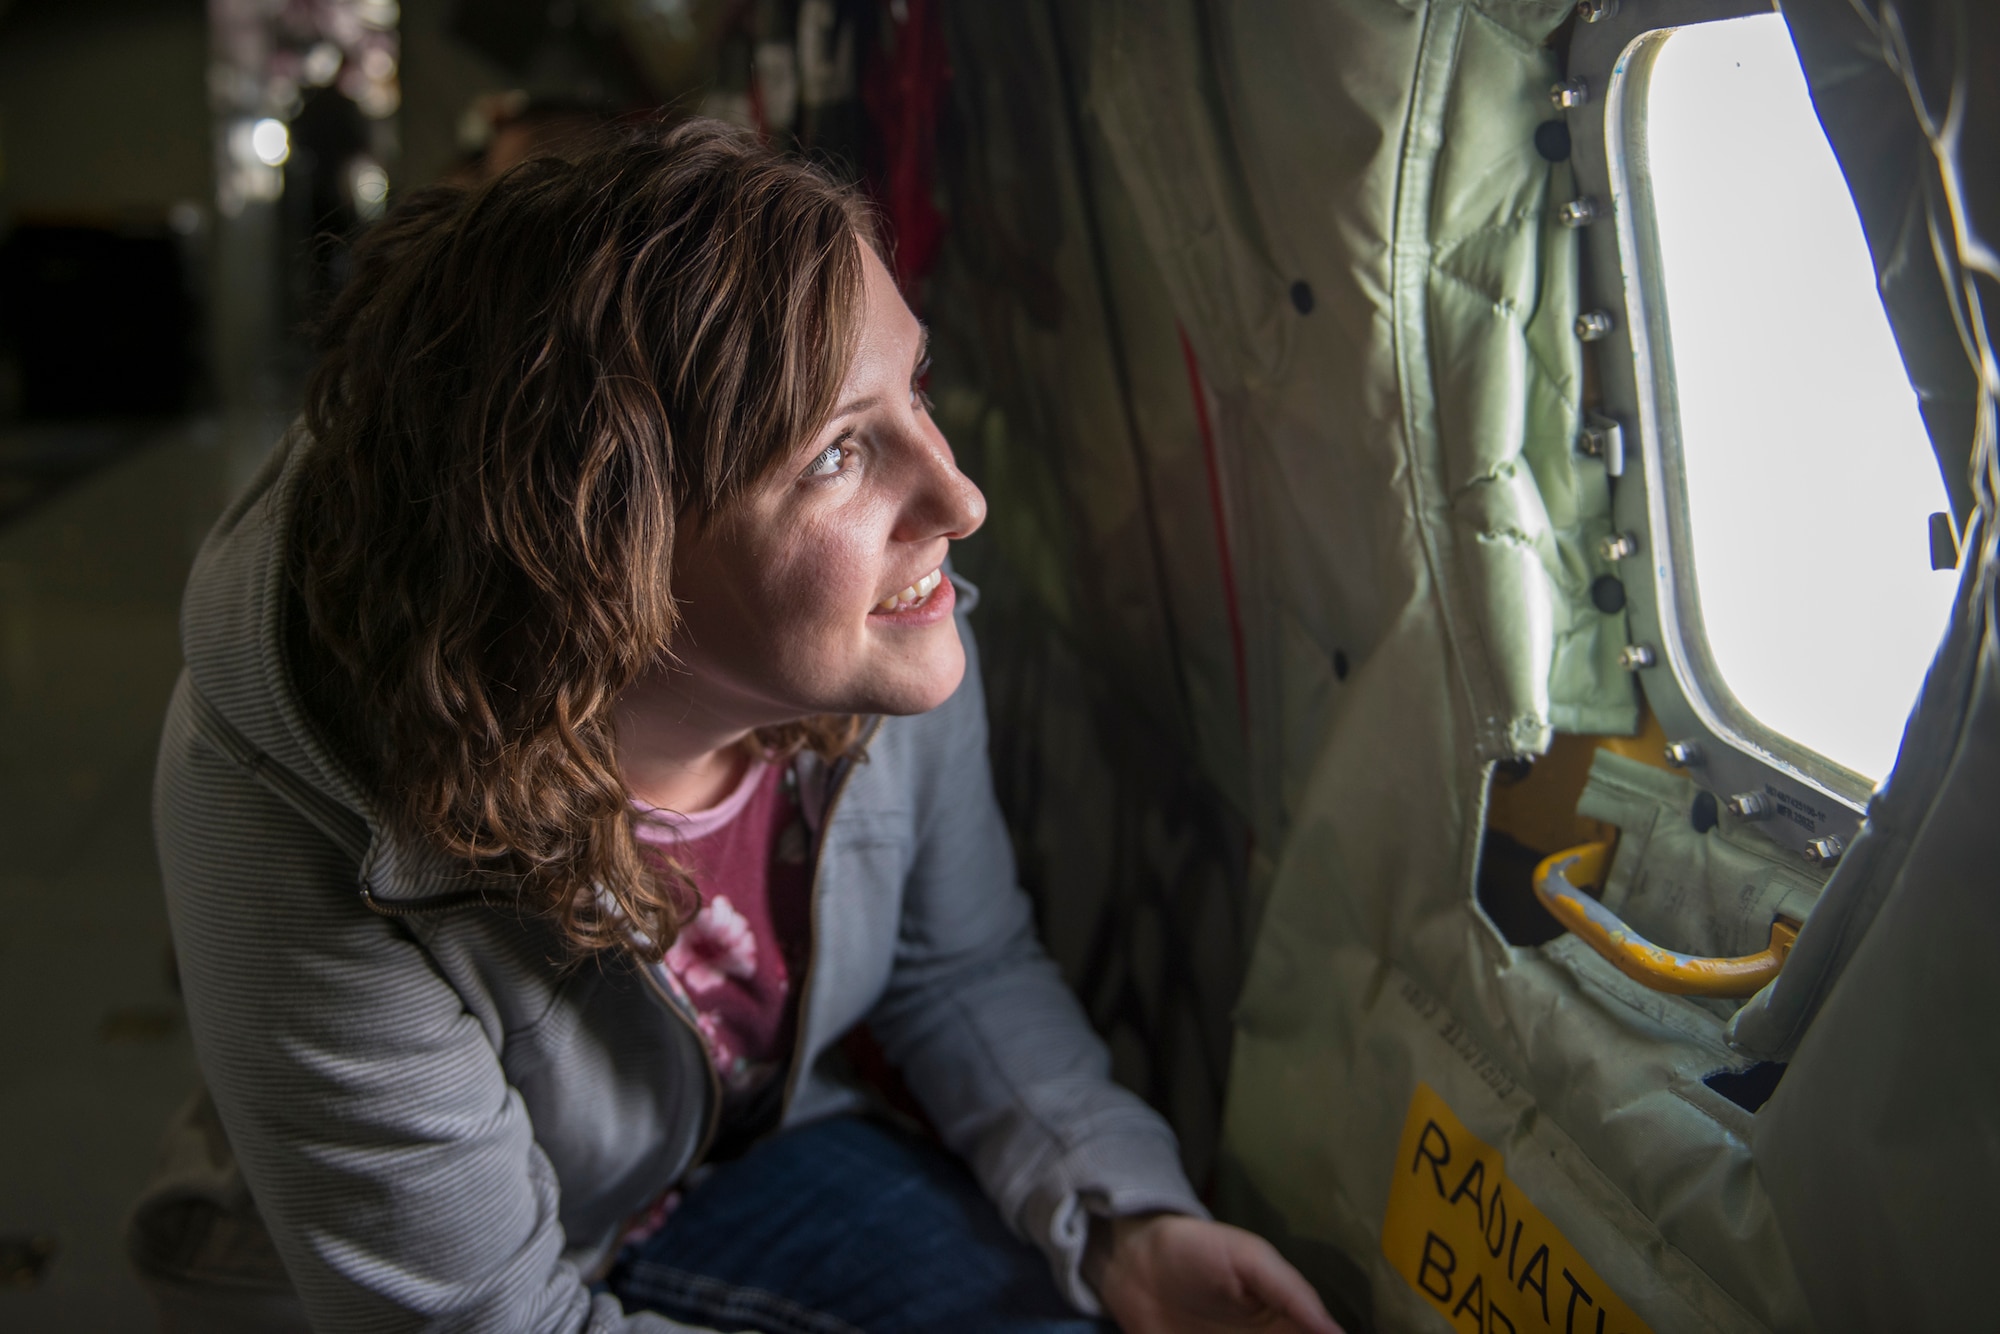 A wife of an Airman from the 124th Fighter Wing looks out the window of a KC-135 Stratotanker assigned to the Utah Air National Guard’s 151st Air Refueling Wing, over Southwest Idaho, Dec. 7, 2019. The Idaho and Utah Air National Guard units collaborated to support an in-flight refueling experience for spouses of Airmen from the 124th FW. (U.S. Air National Guard photo by Airman 1st Class Taylor Walker)